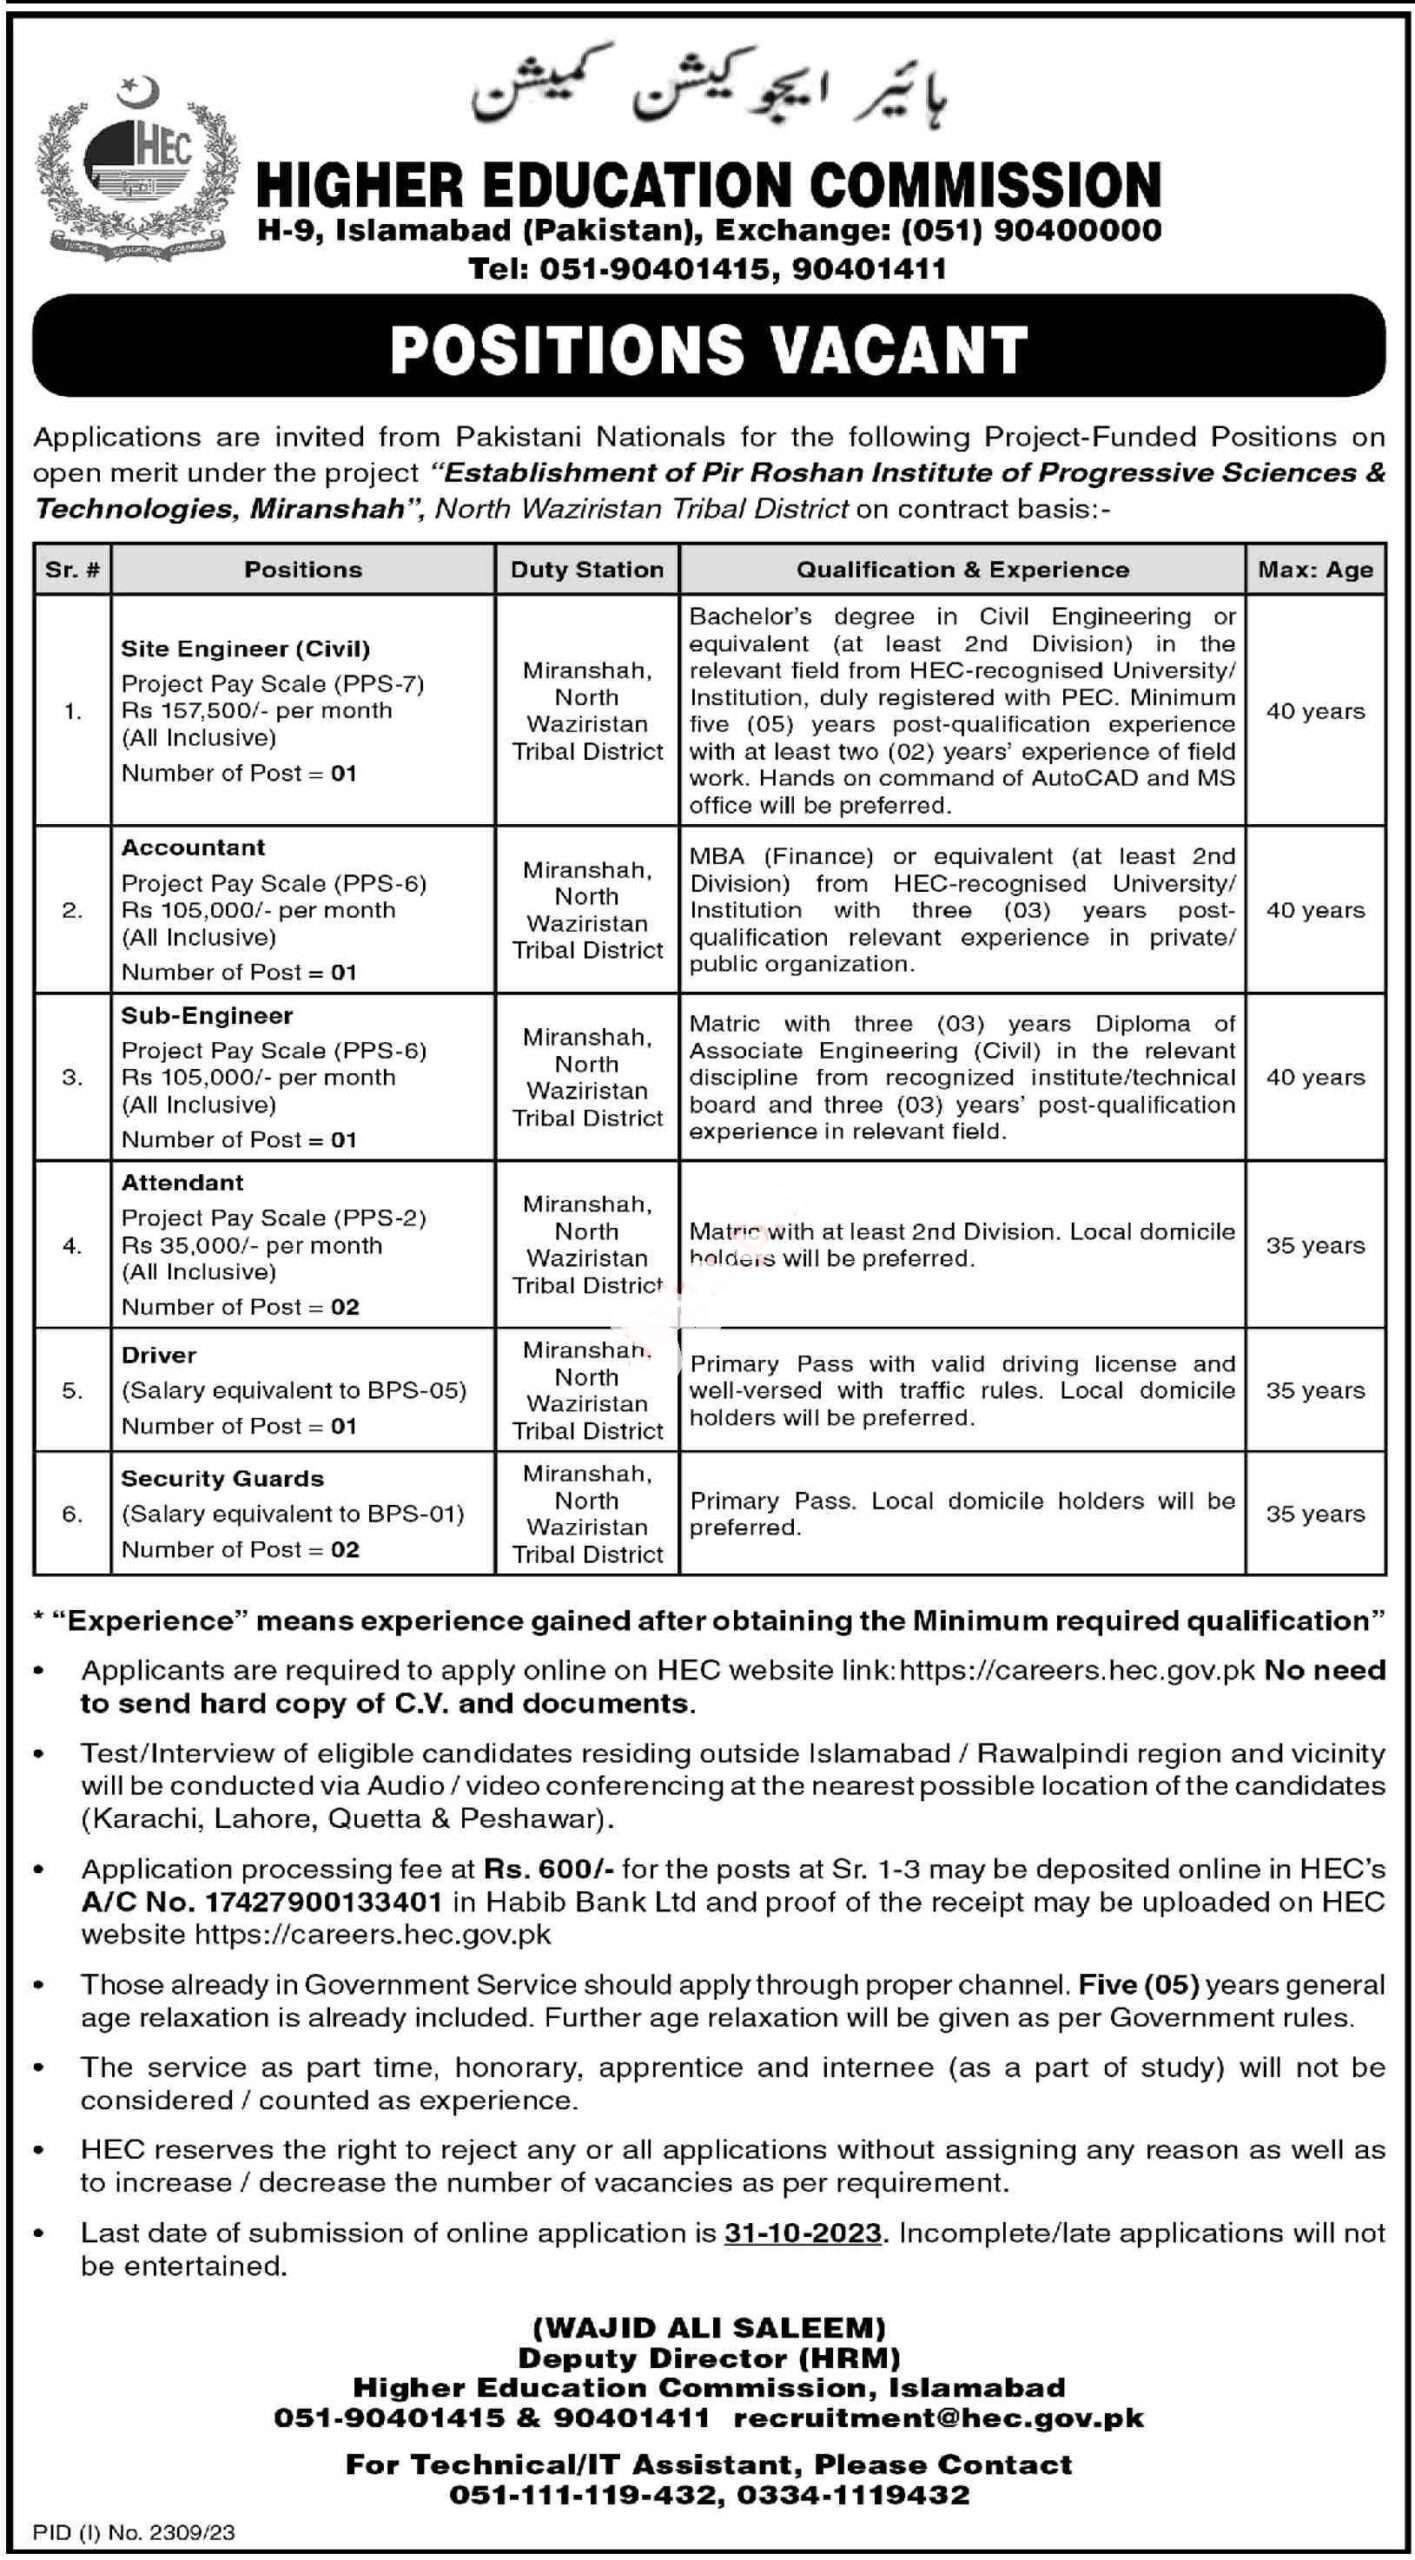 Latest HEC Jobs | Apply Only for Higher Education Commission Jobs